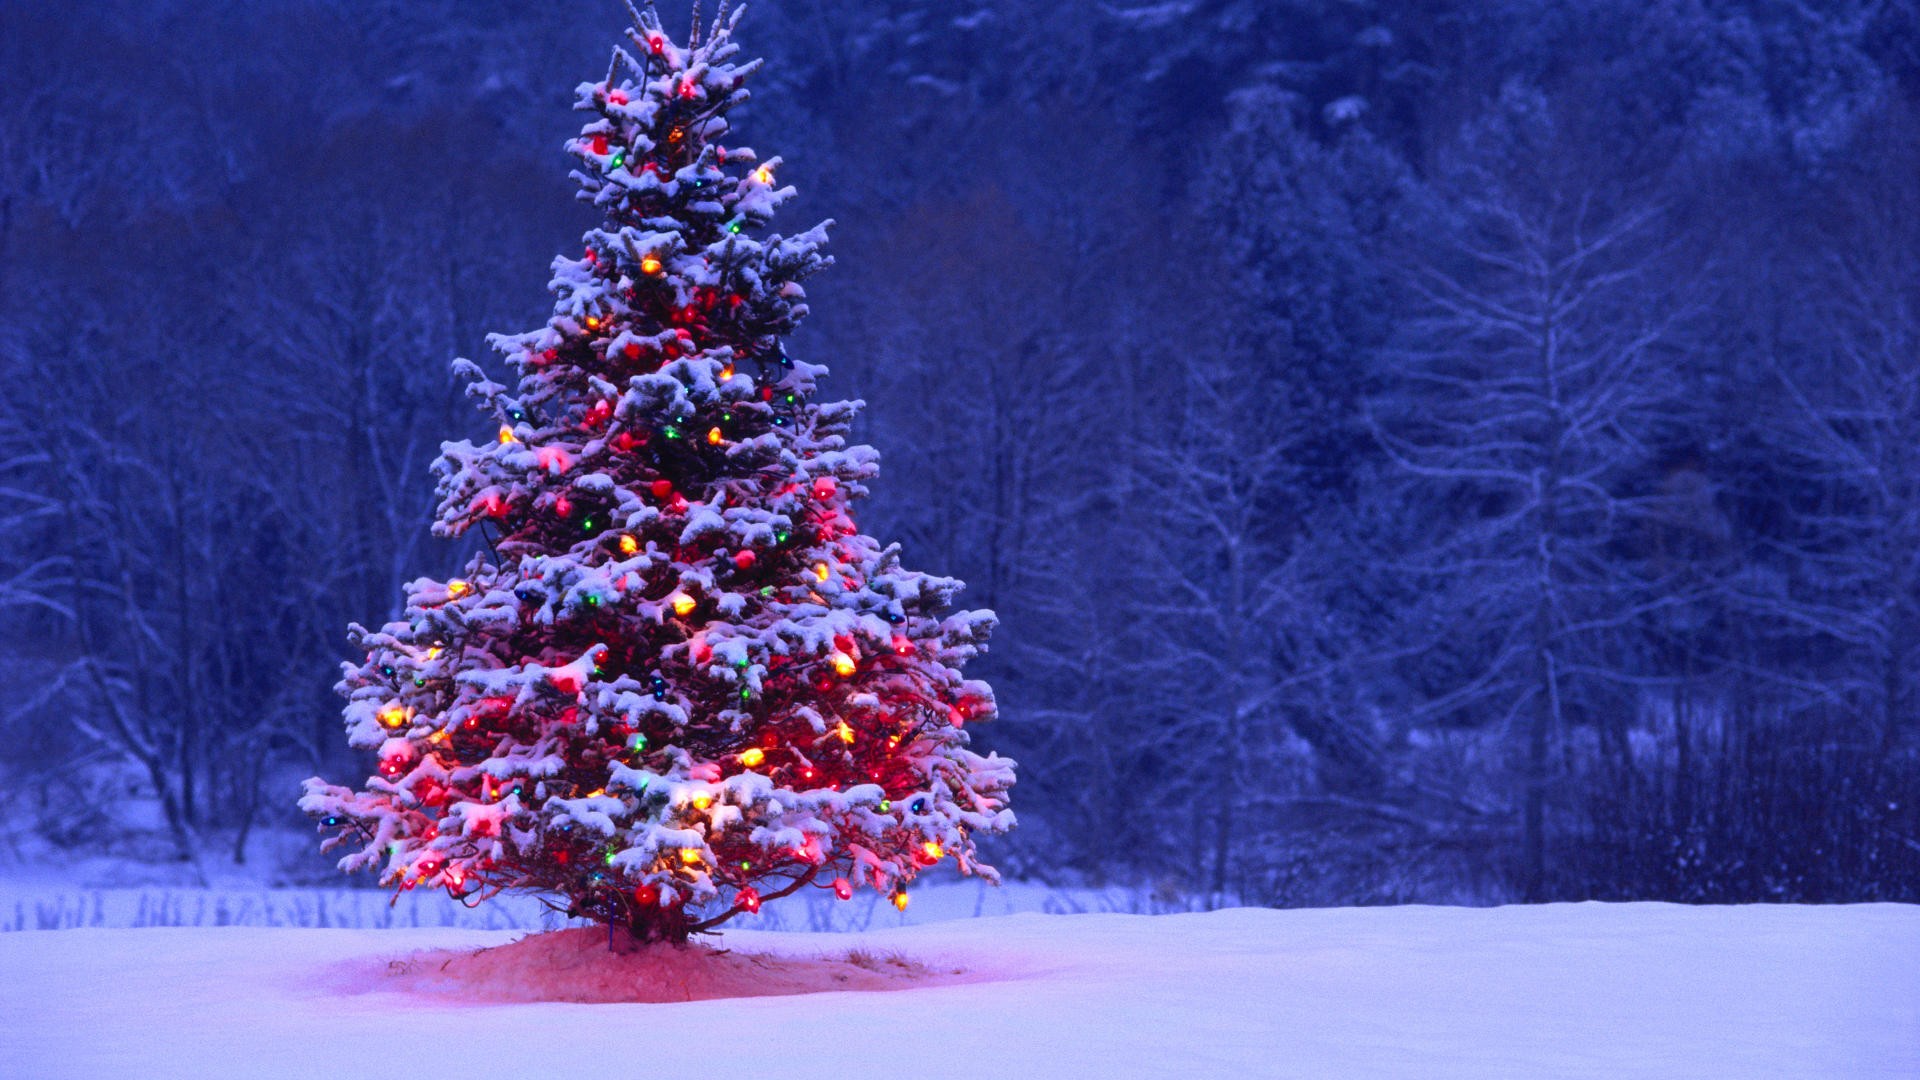 HD wallpaper A blurred image of a lit up outdoor Christmas tree blurry  lights  Wallpaper Flare